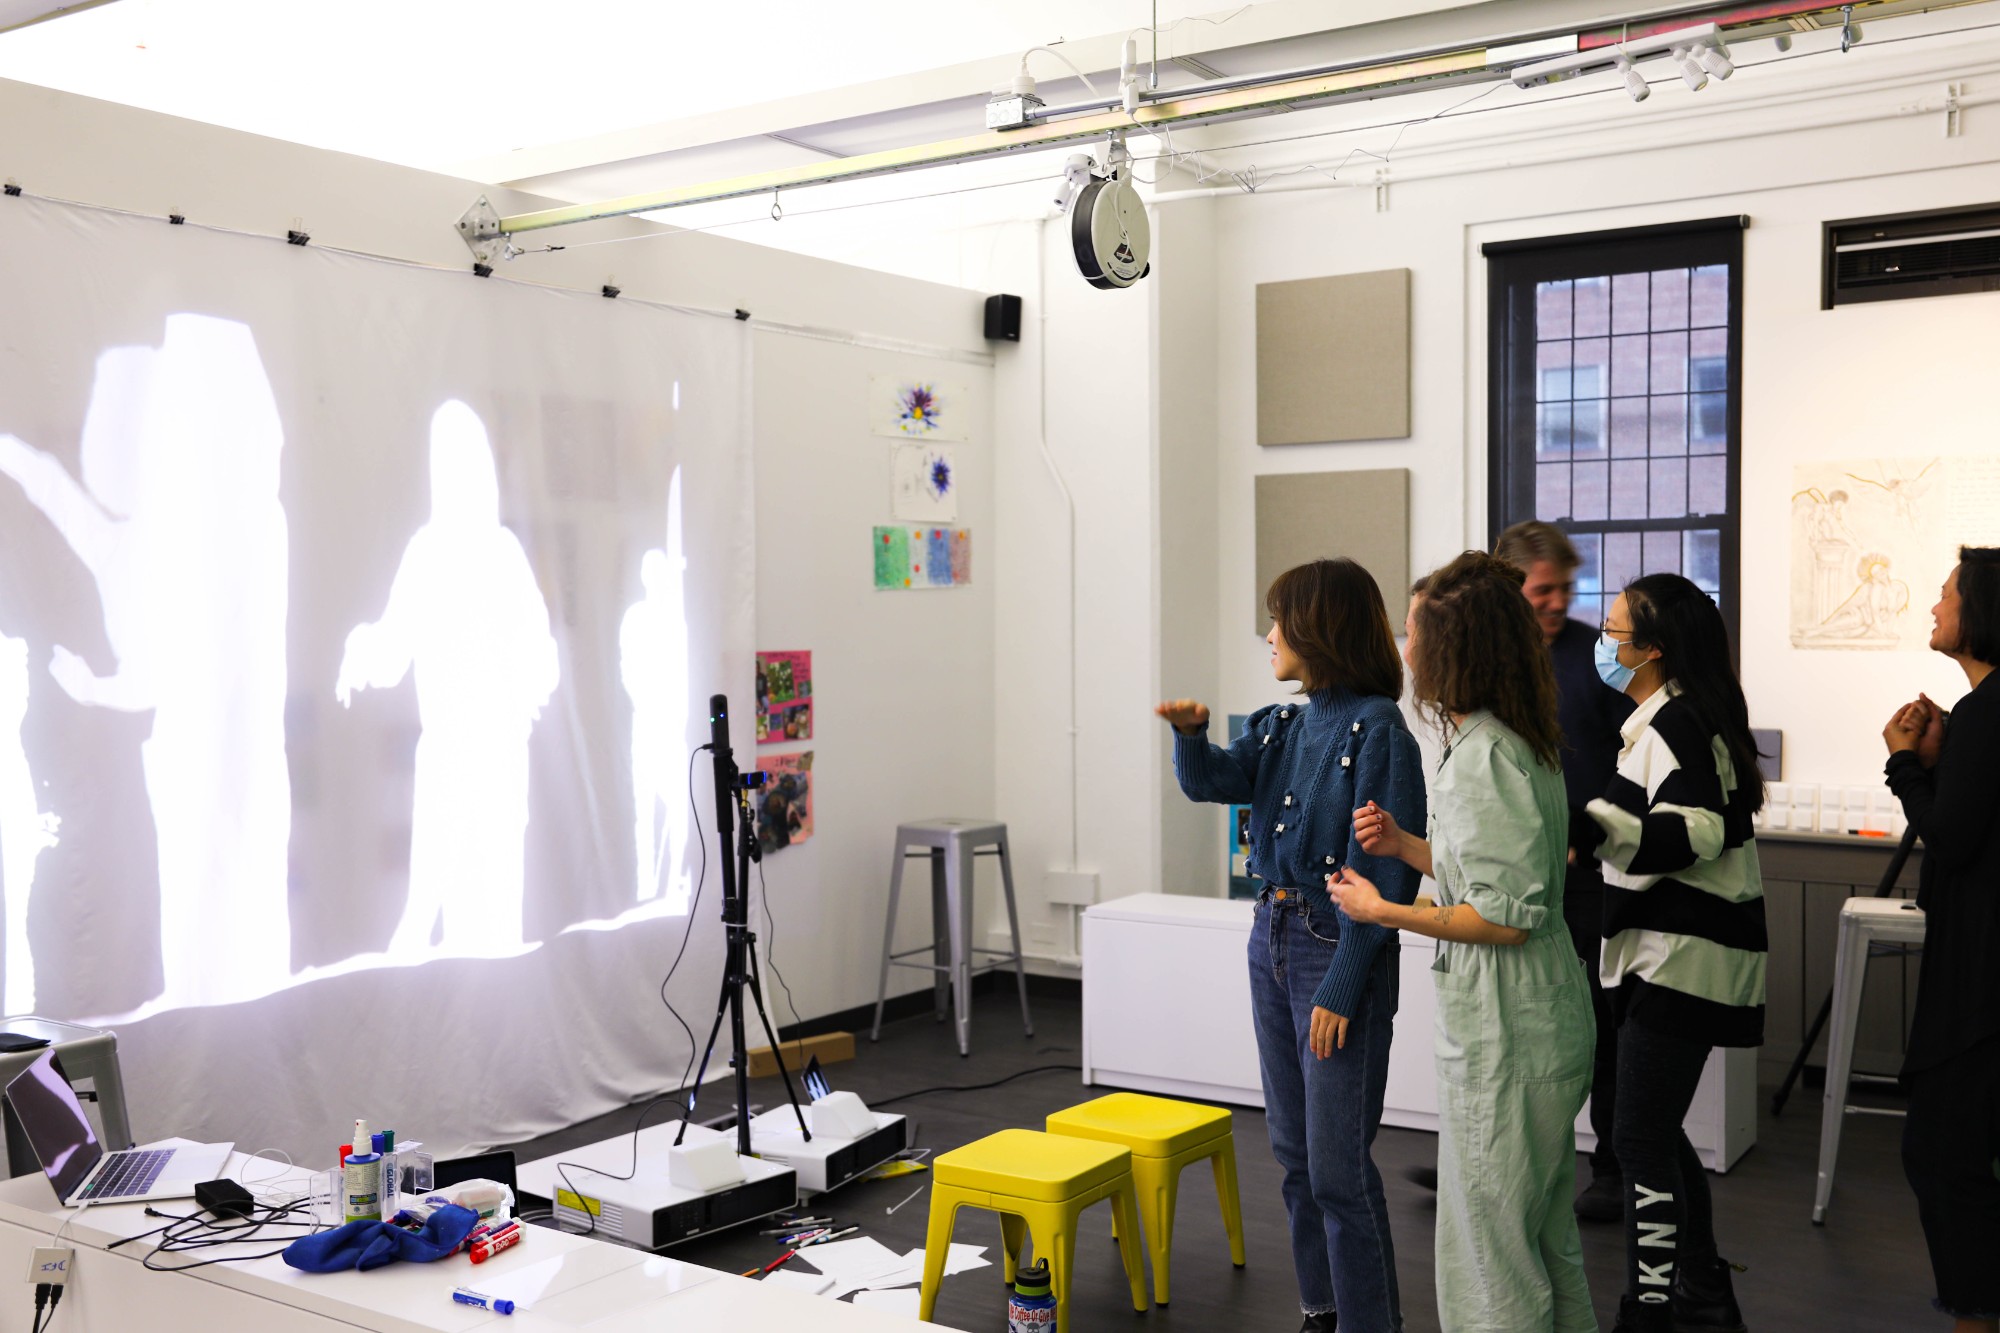 A group of five people at the Gestures Learning exhibit standing near a projection of white silhouettes.